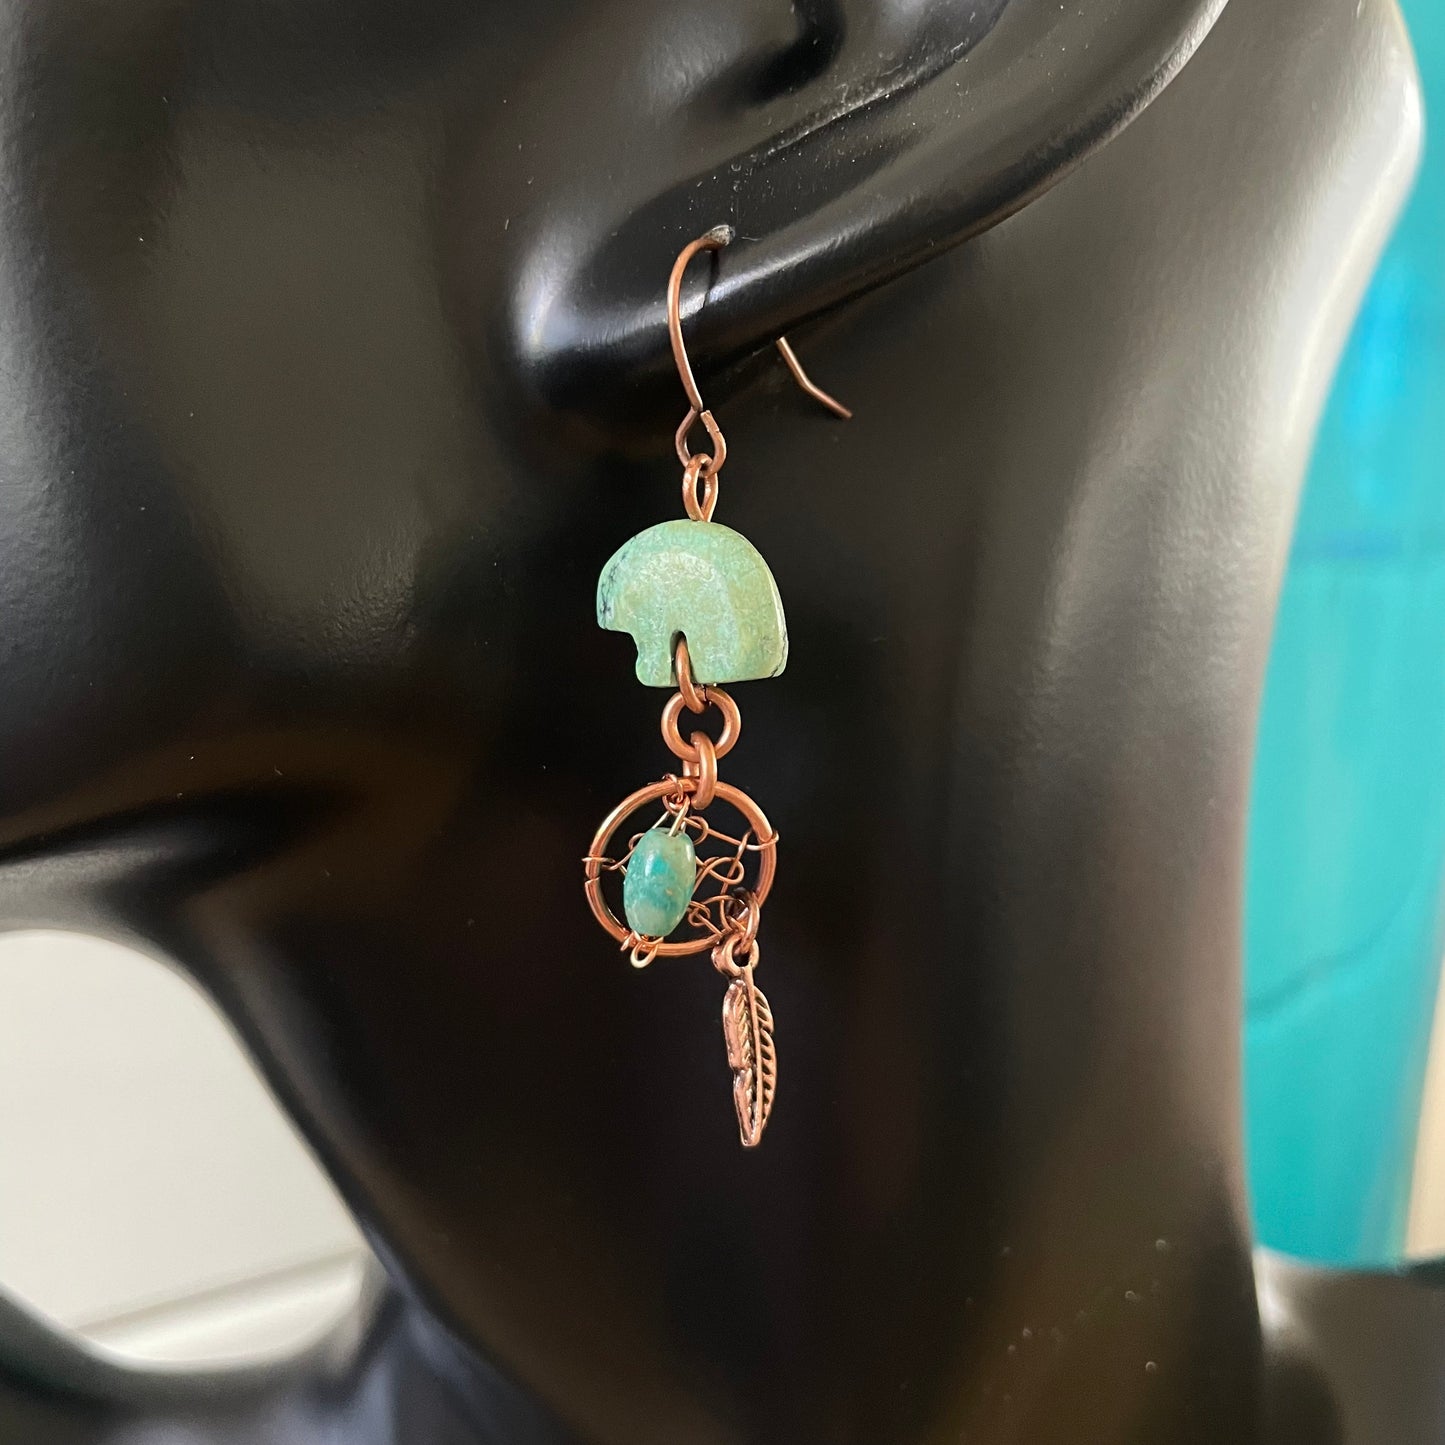 Handmade Carved Turquoise Bear & Dreamcatcher Earrings 2" Dangle Feather Copper Southwest Western